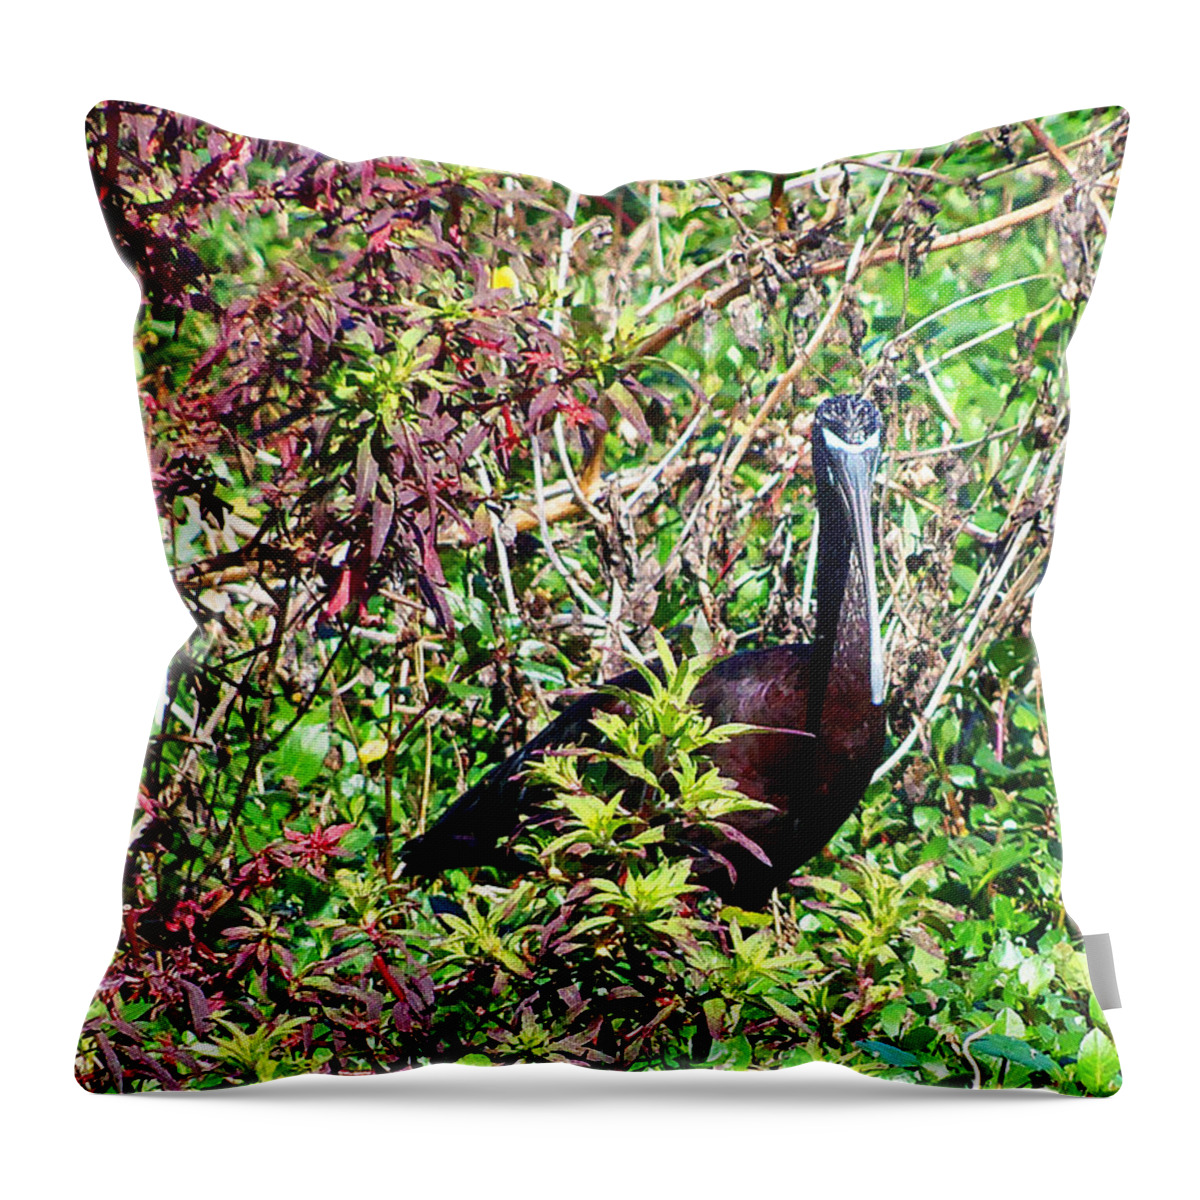 Glossy Ibis Throw Pillow featuring the photograph Glossy Ibis 000 by Christopher Mercer